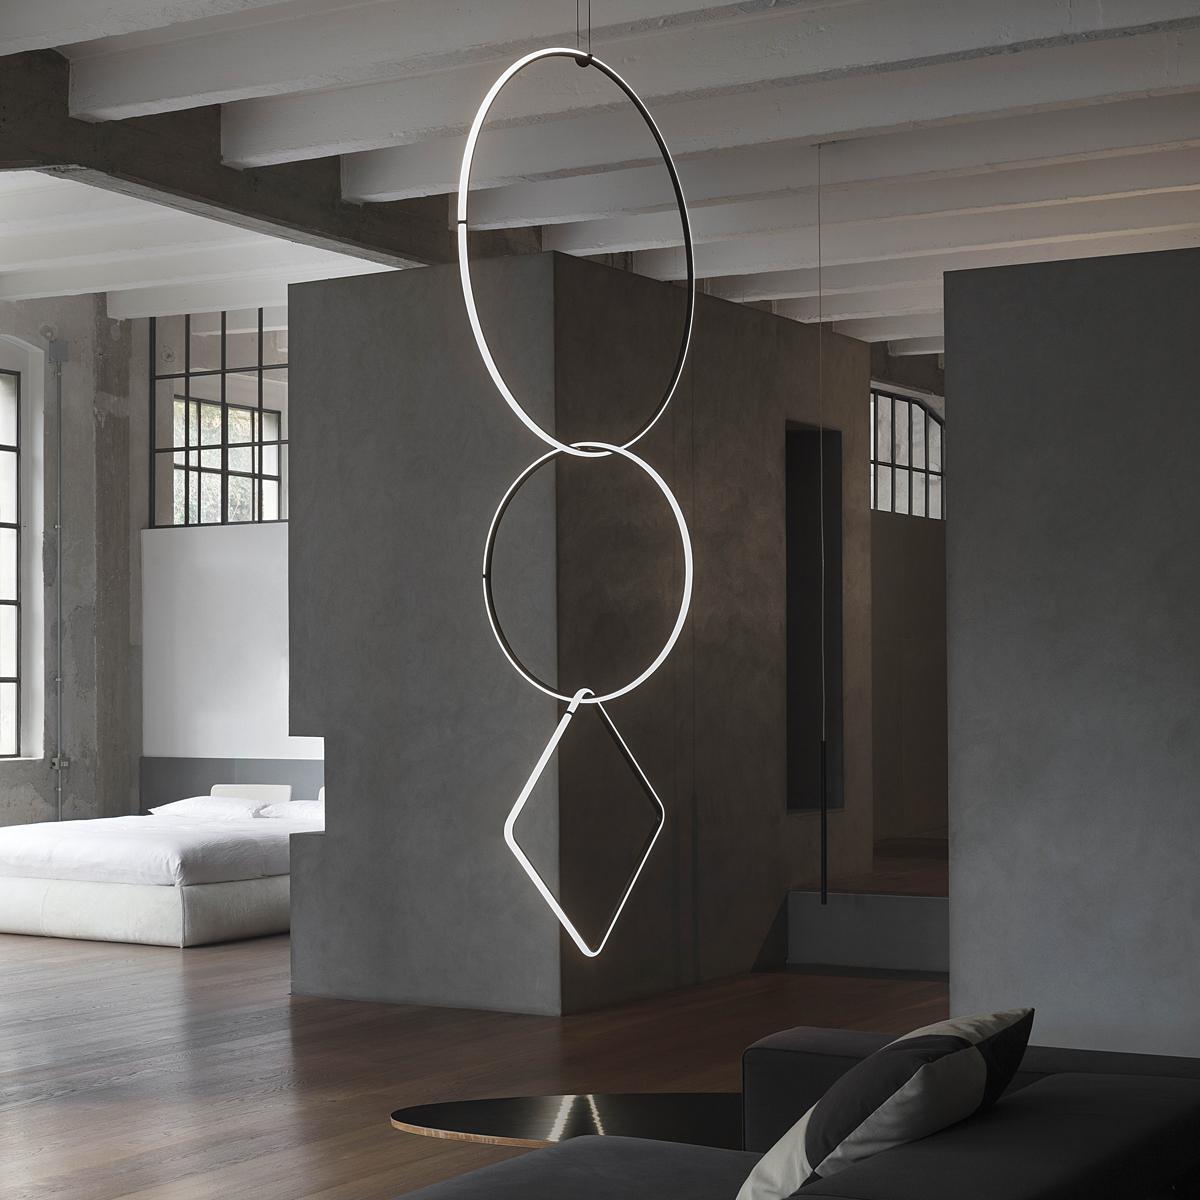 FLOS Square, Circle and Broken Line Arrangements Light by Michael Anastassiades For Sale 4